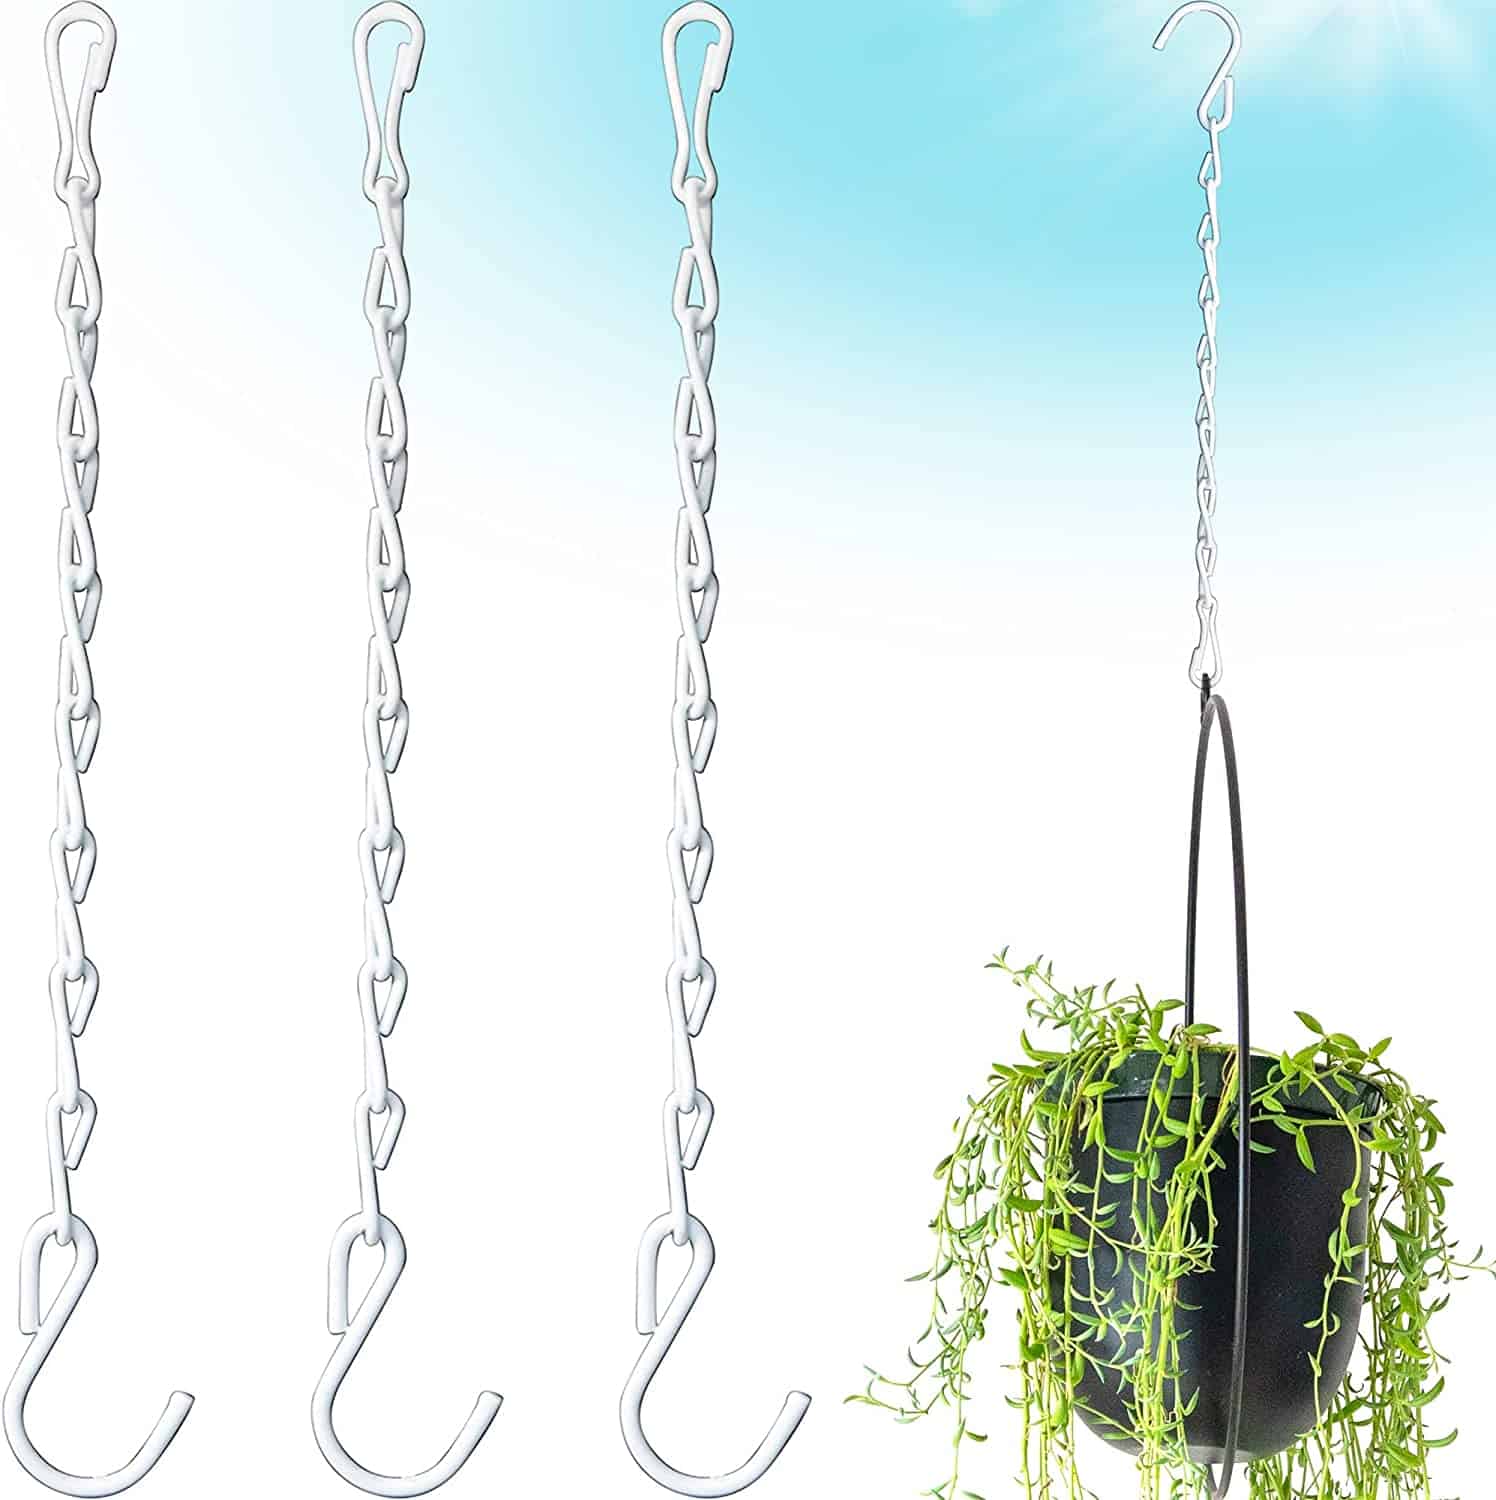 Hanging Chain, 9.5 Inch, 4-Pack, White, for Bird Feeders, Planters, Fixtures, Lanterns, Suet Baskets, Wind Chimes and More! Outdoor/Indoor Use